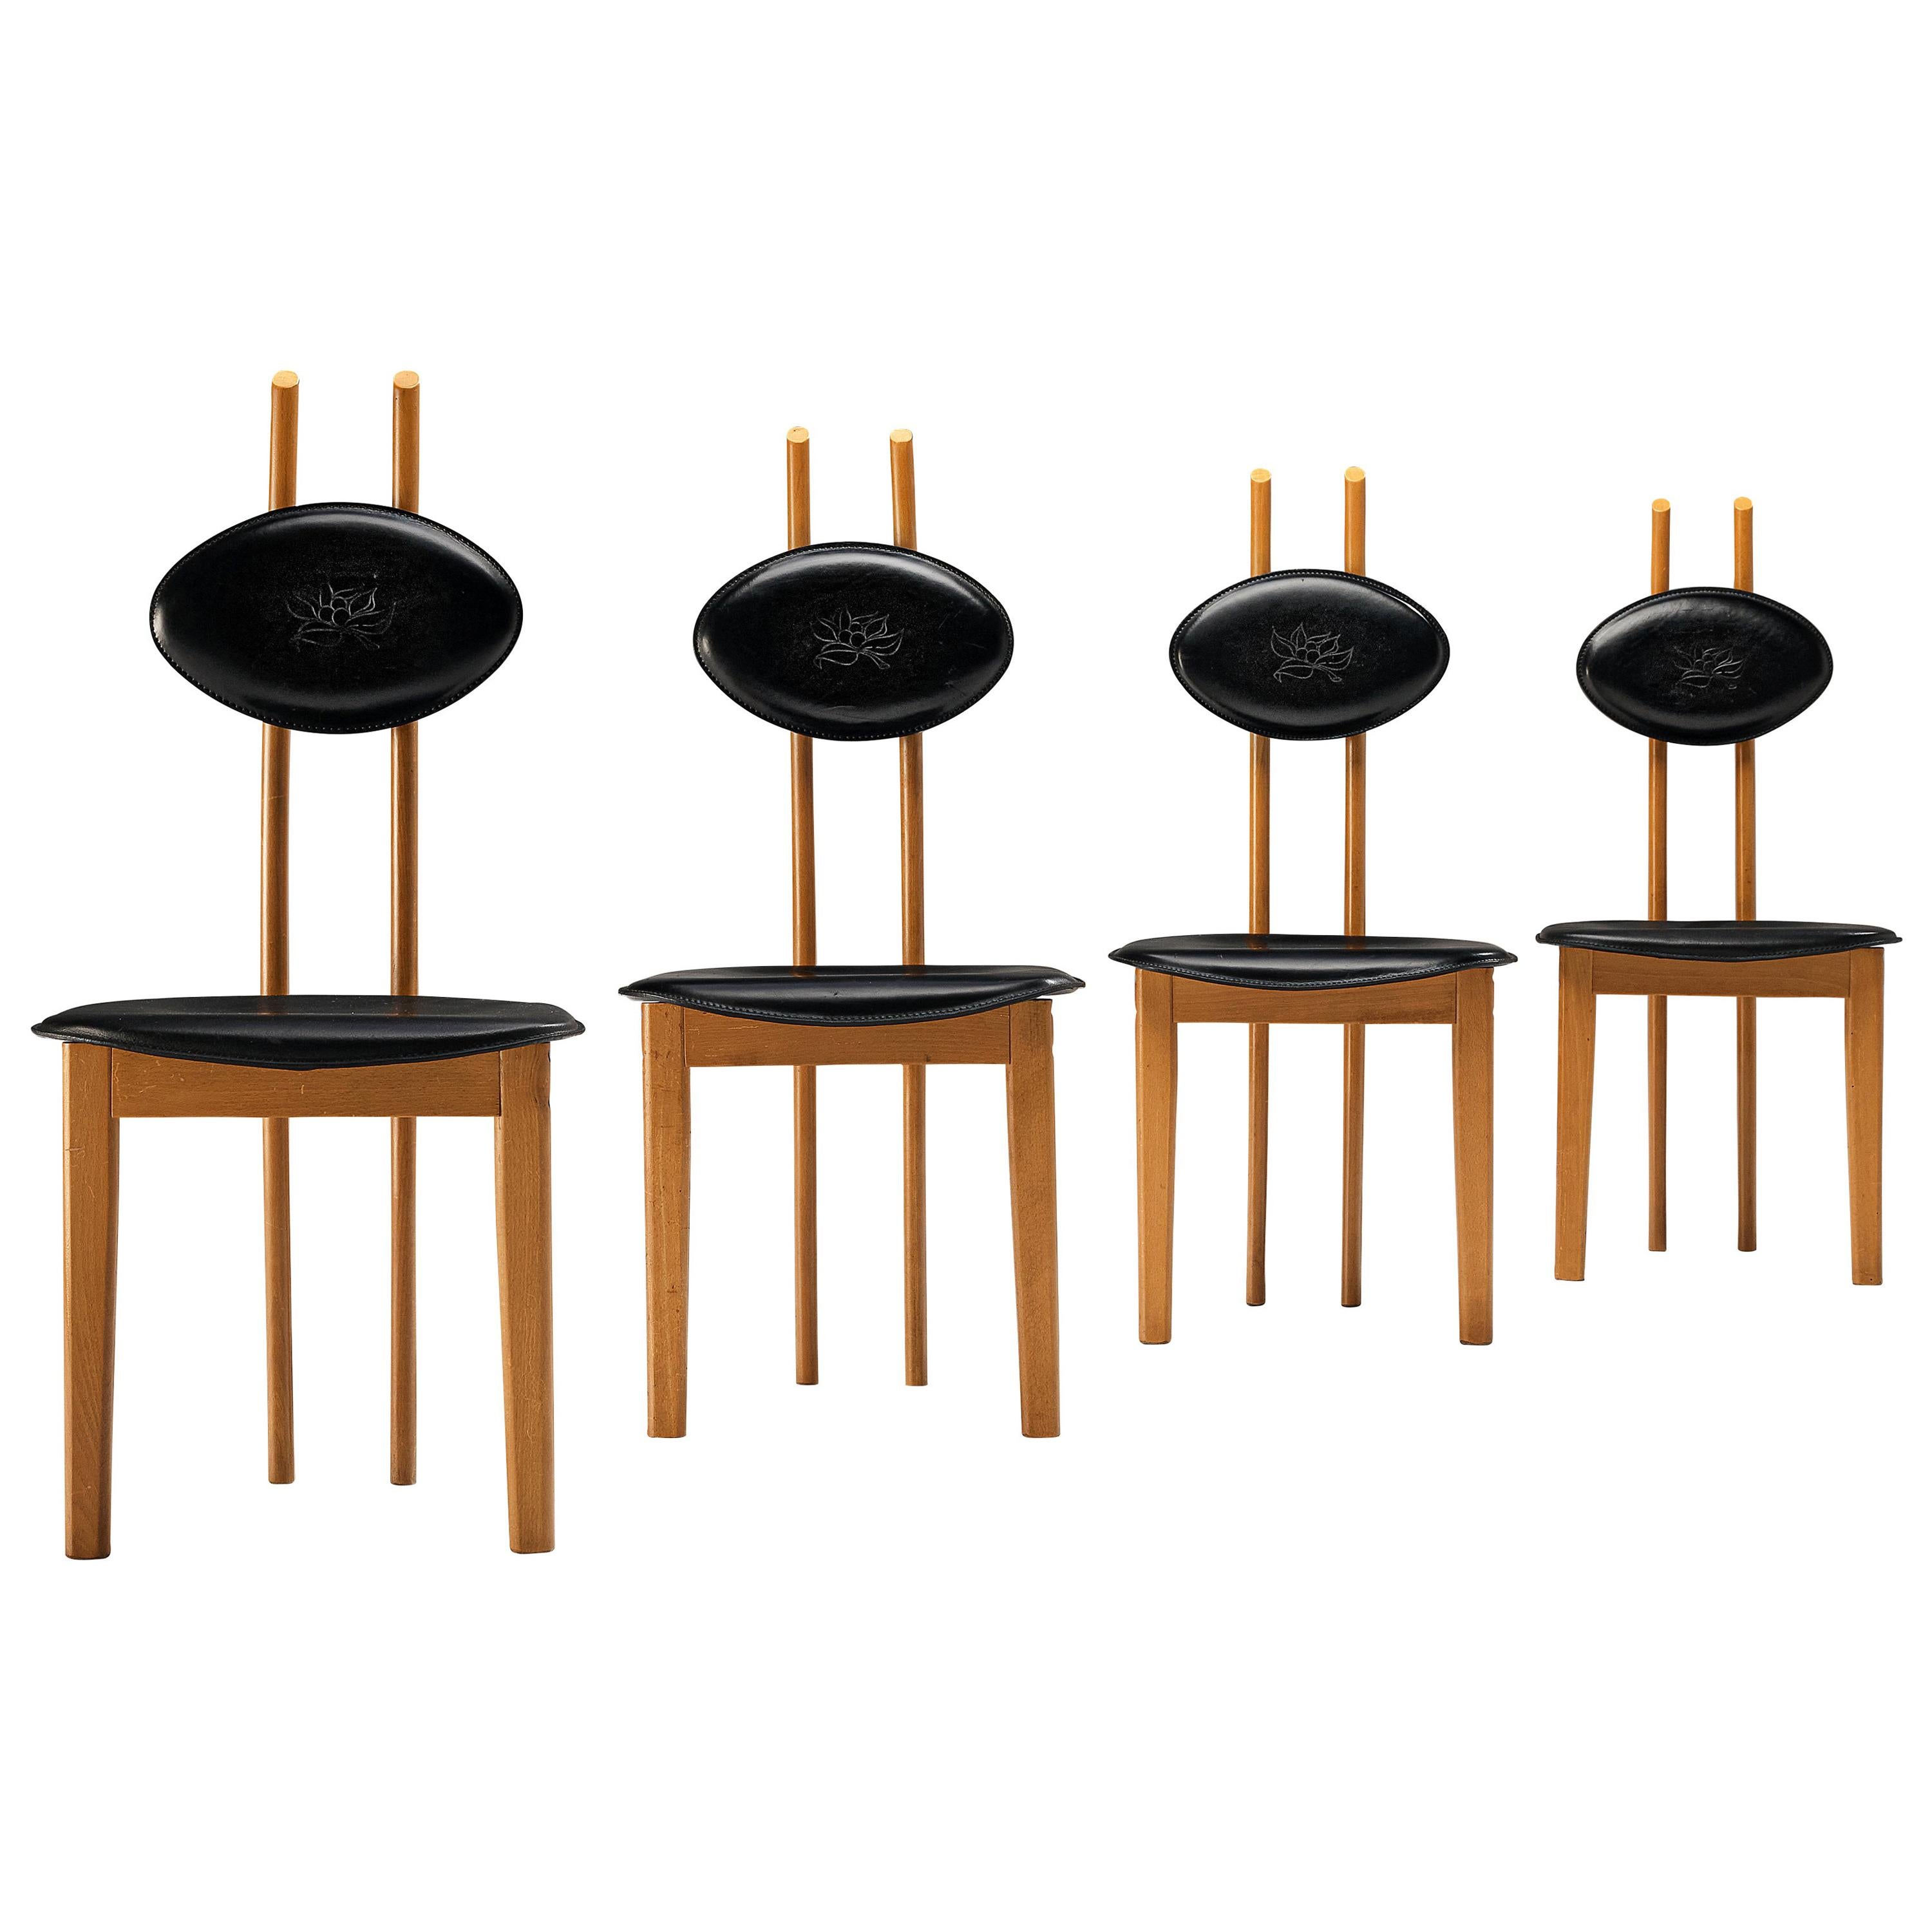 Italian Sculptural Chairs in Black Leather